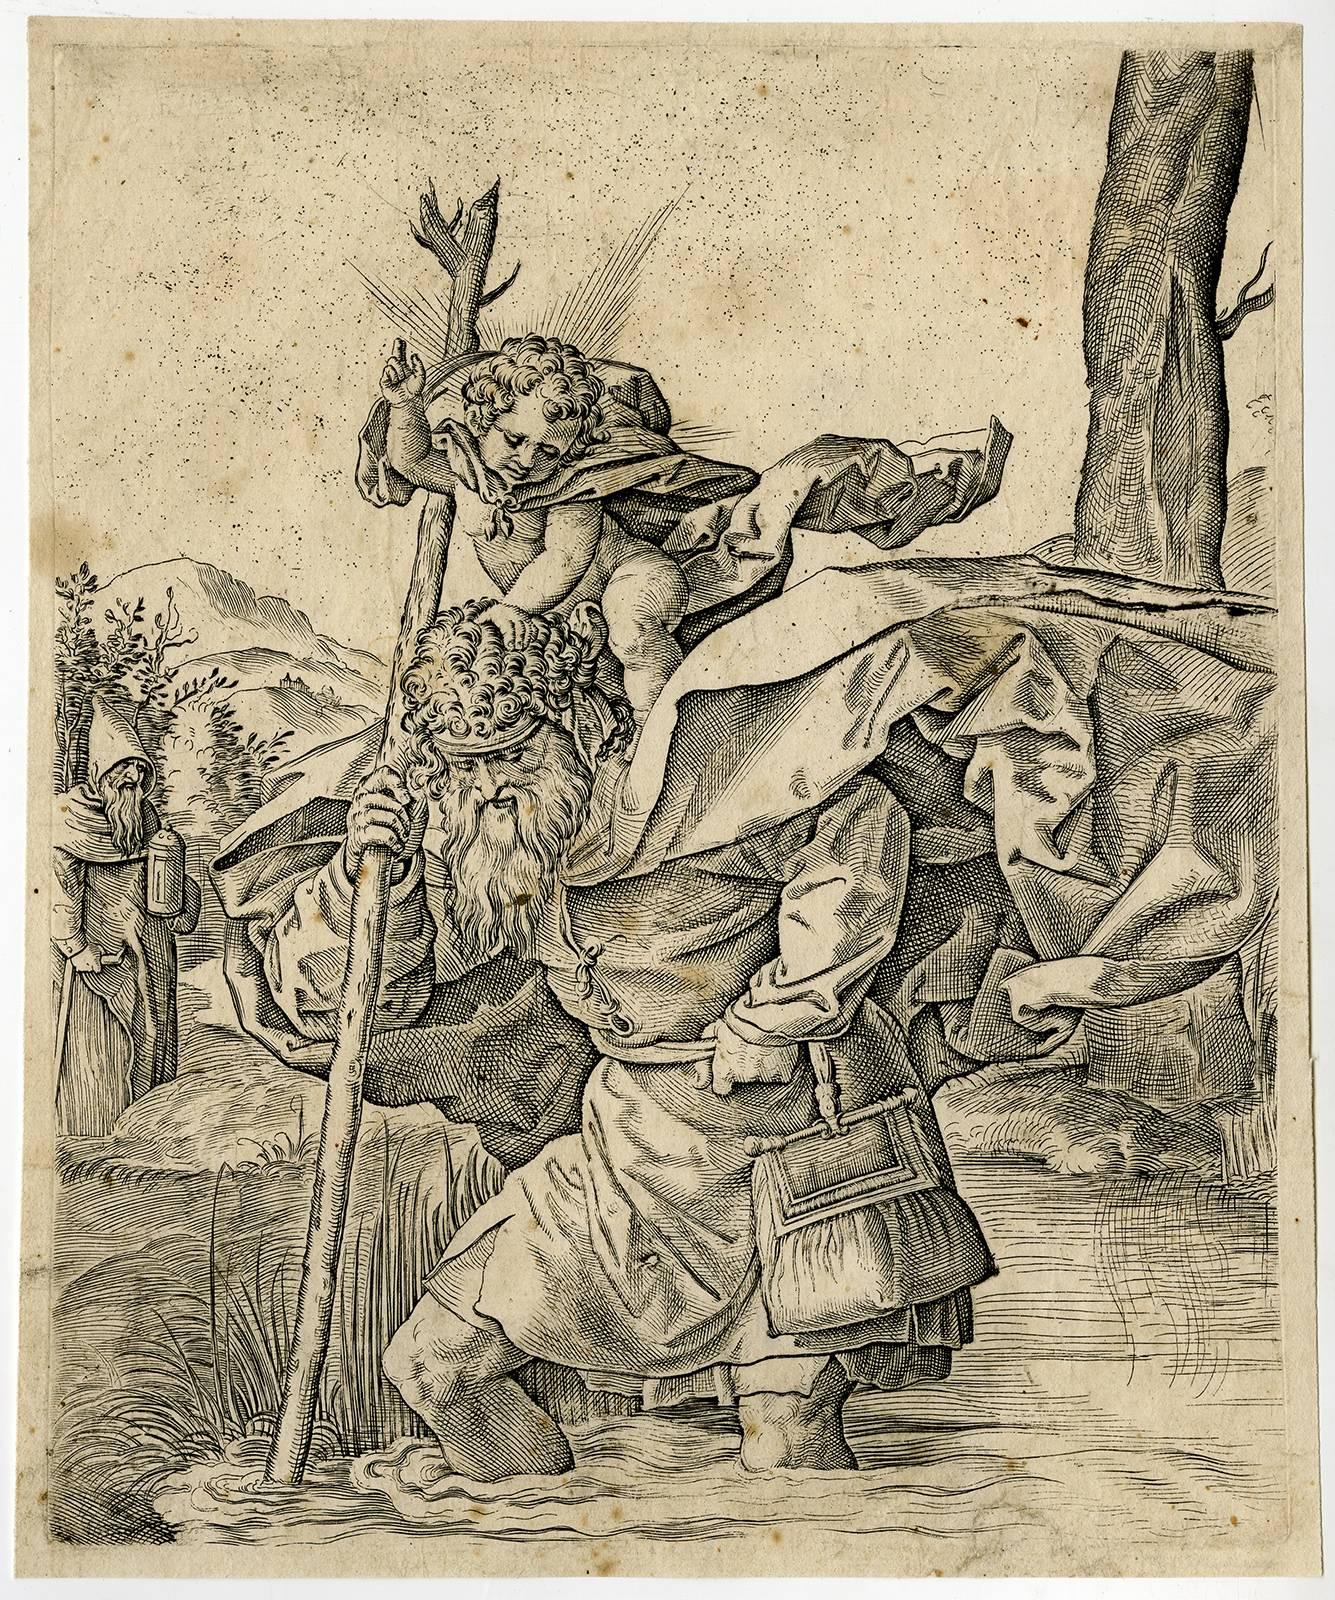 Unknown Figurative Print - Untitled - Landscape with Saint Christopher carrying the child Christ.